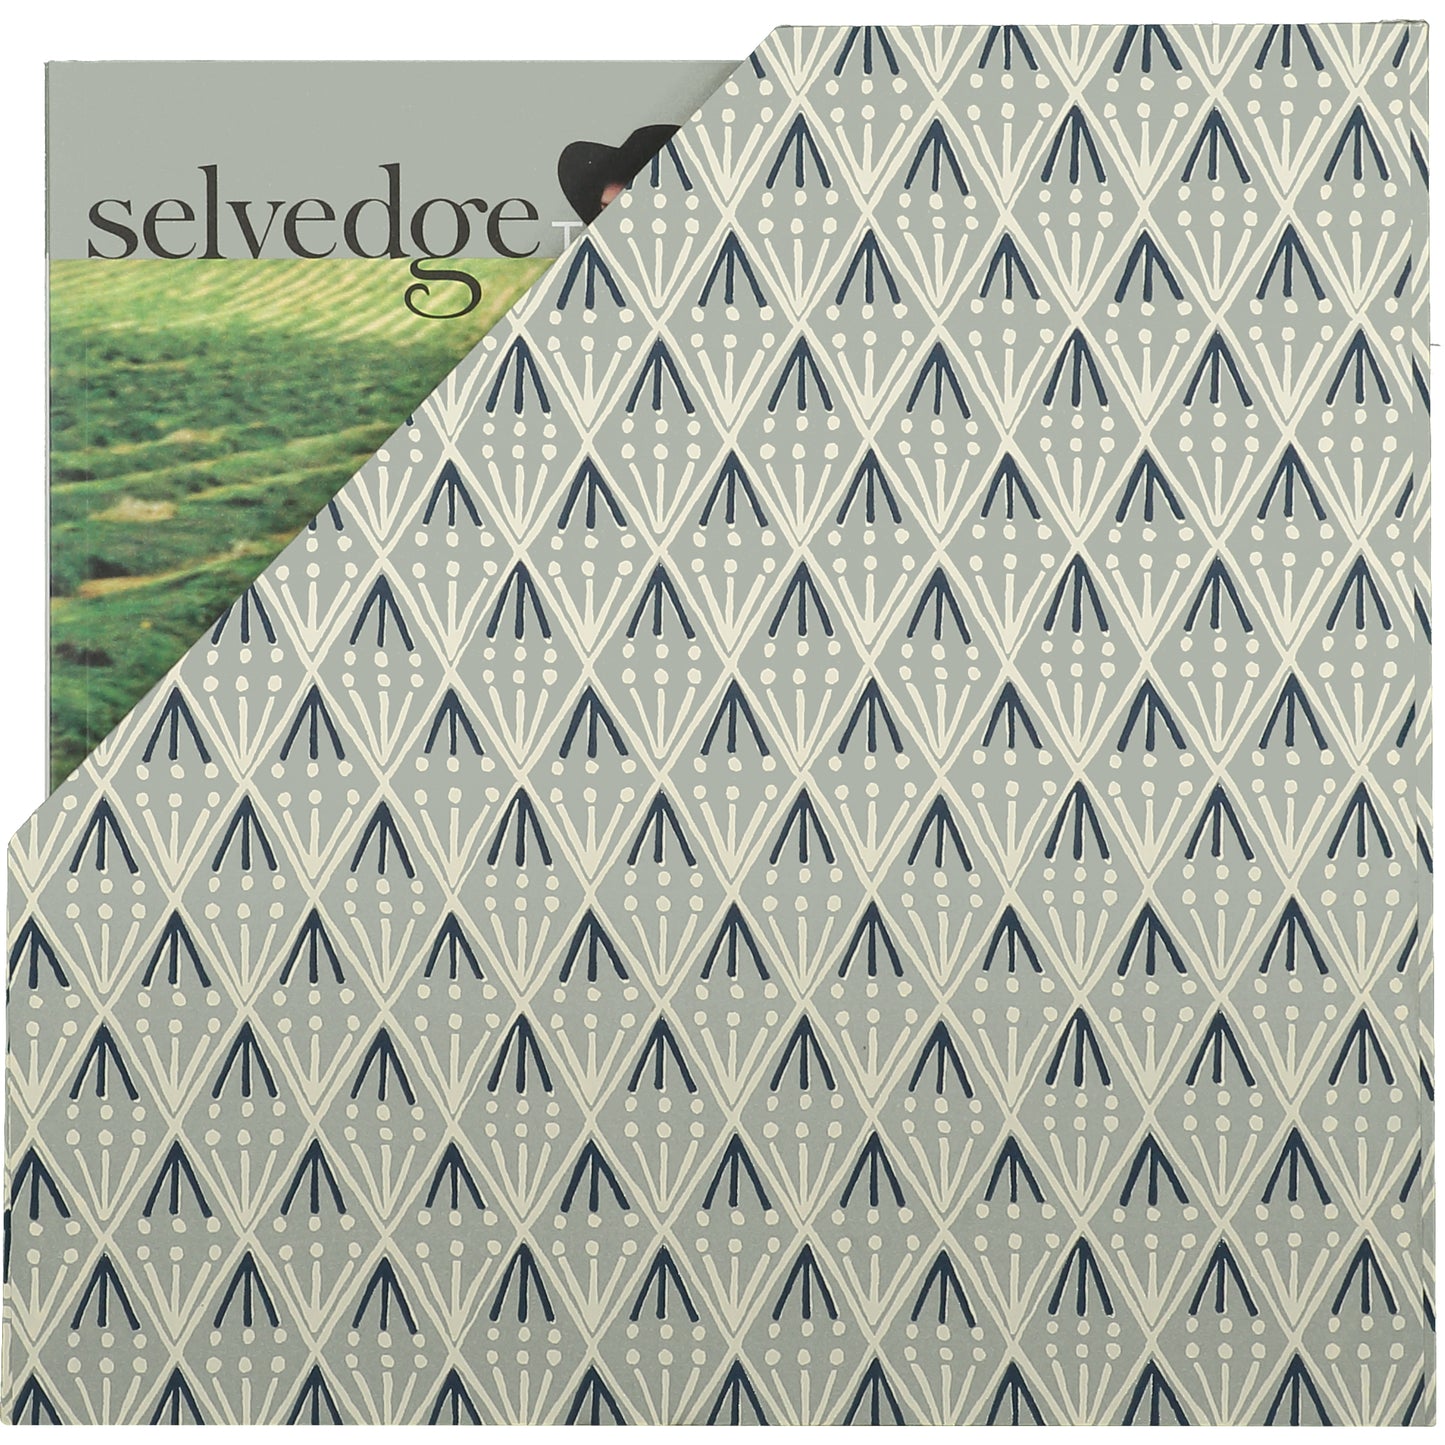 The Selvedge Magazine File by Cambridge Imprint (Available in three colourways)